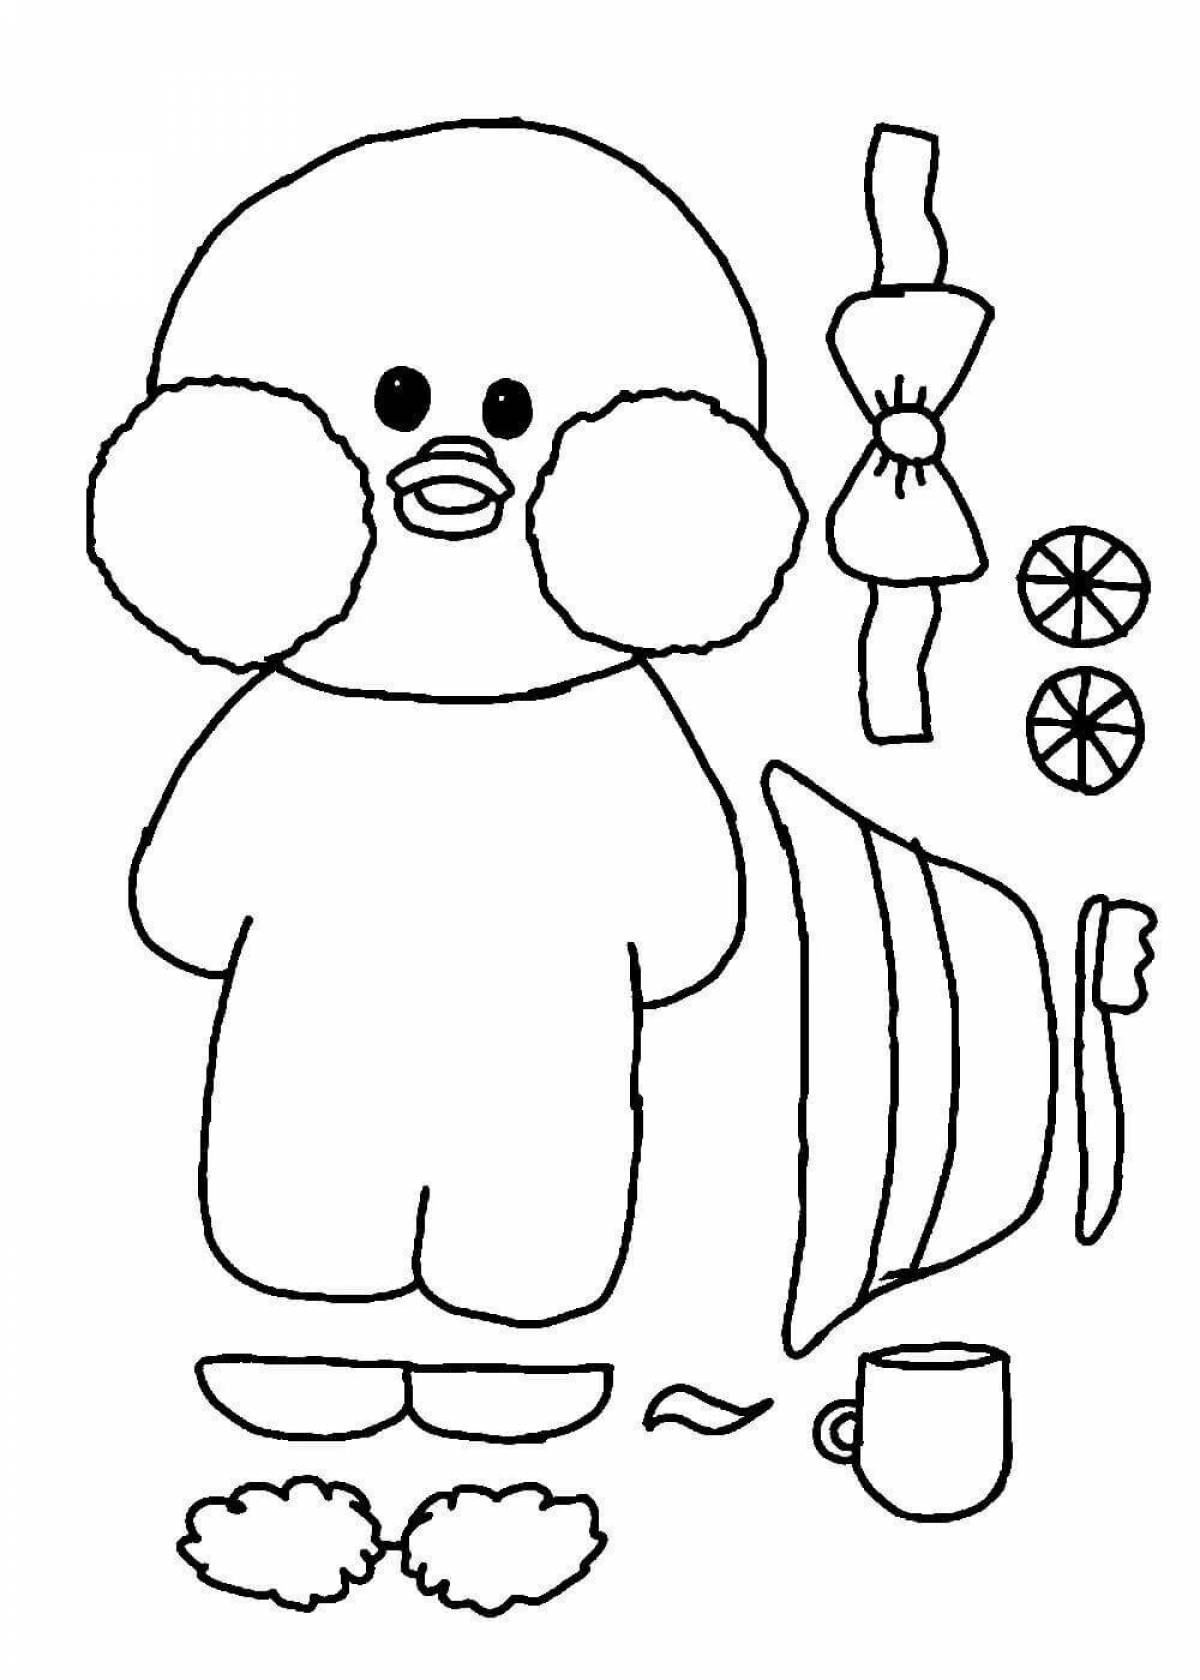 Coloring page of mesmerizing cosmetics for lalafan duck